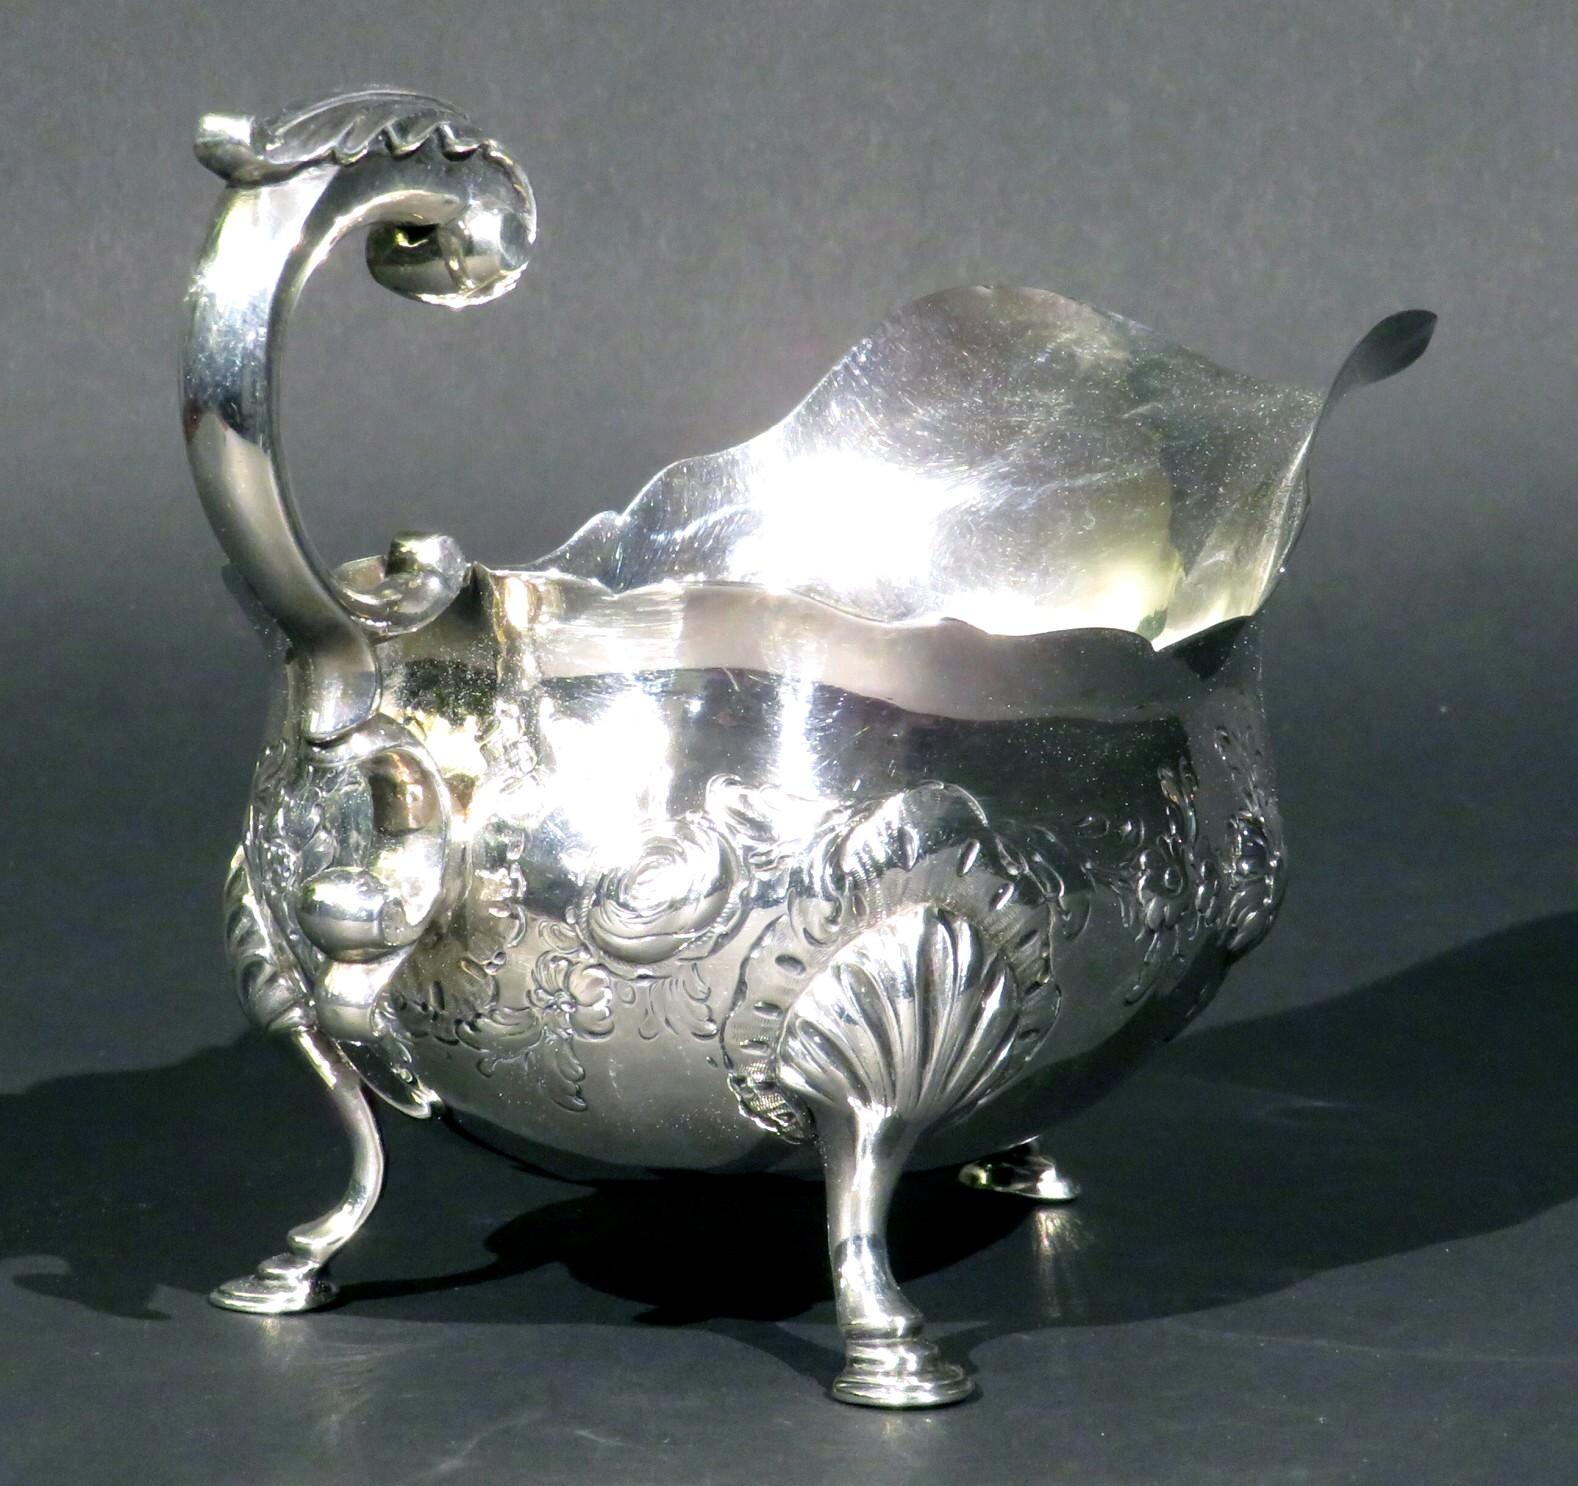 English Very Fine Mid 18th Century George III Sterling Silver Gravy Boat, London, 1761 For Sale